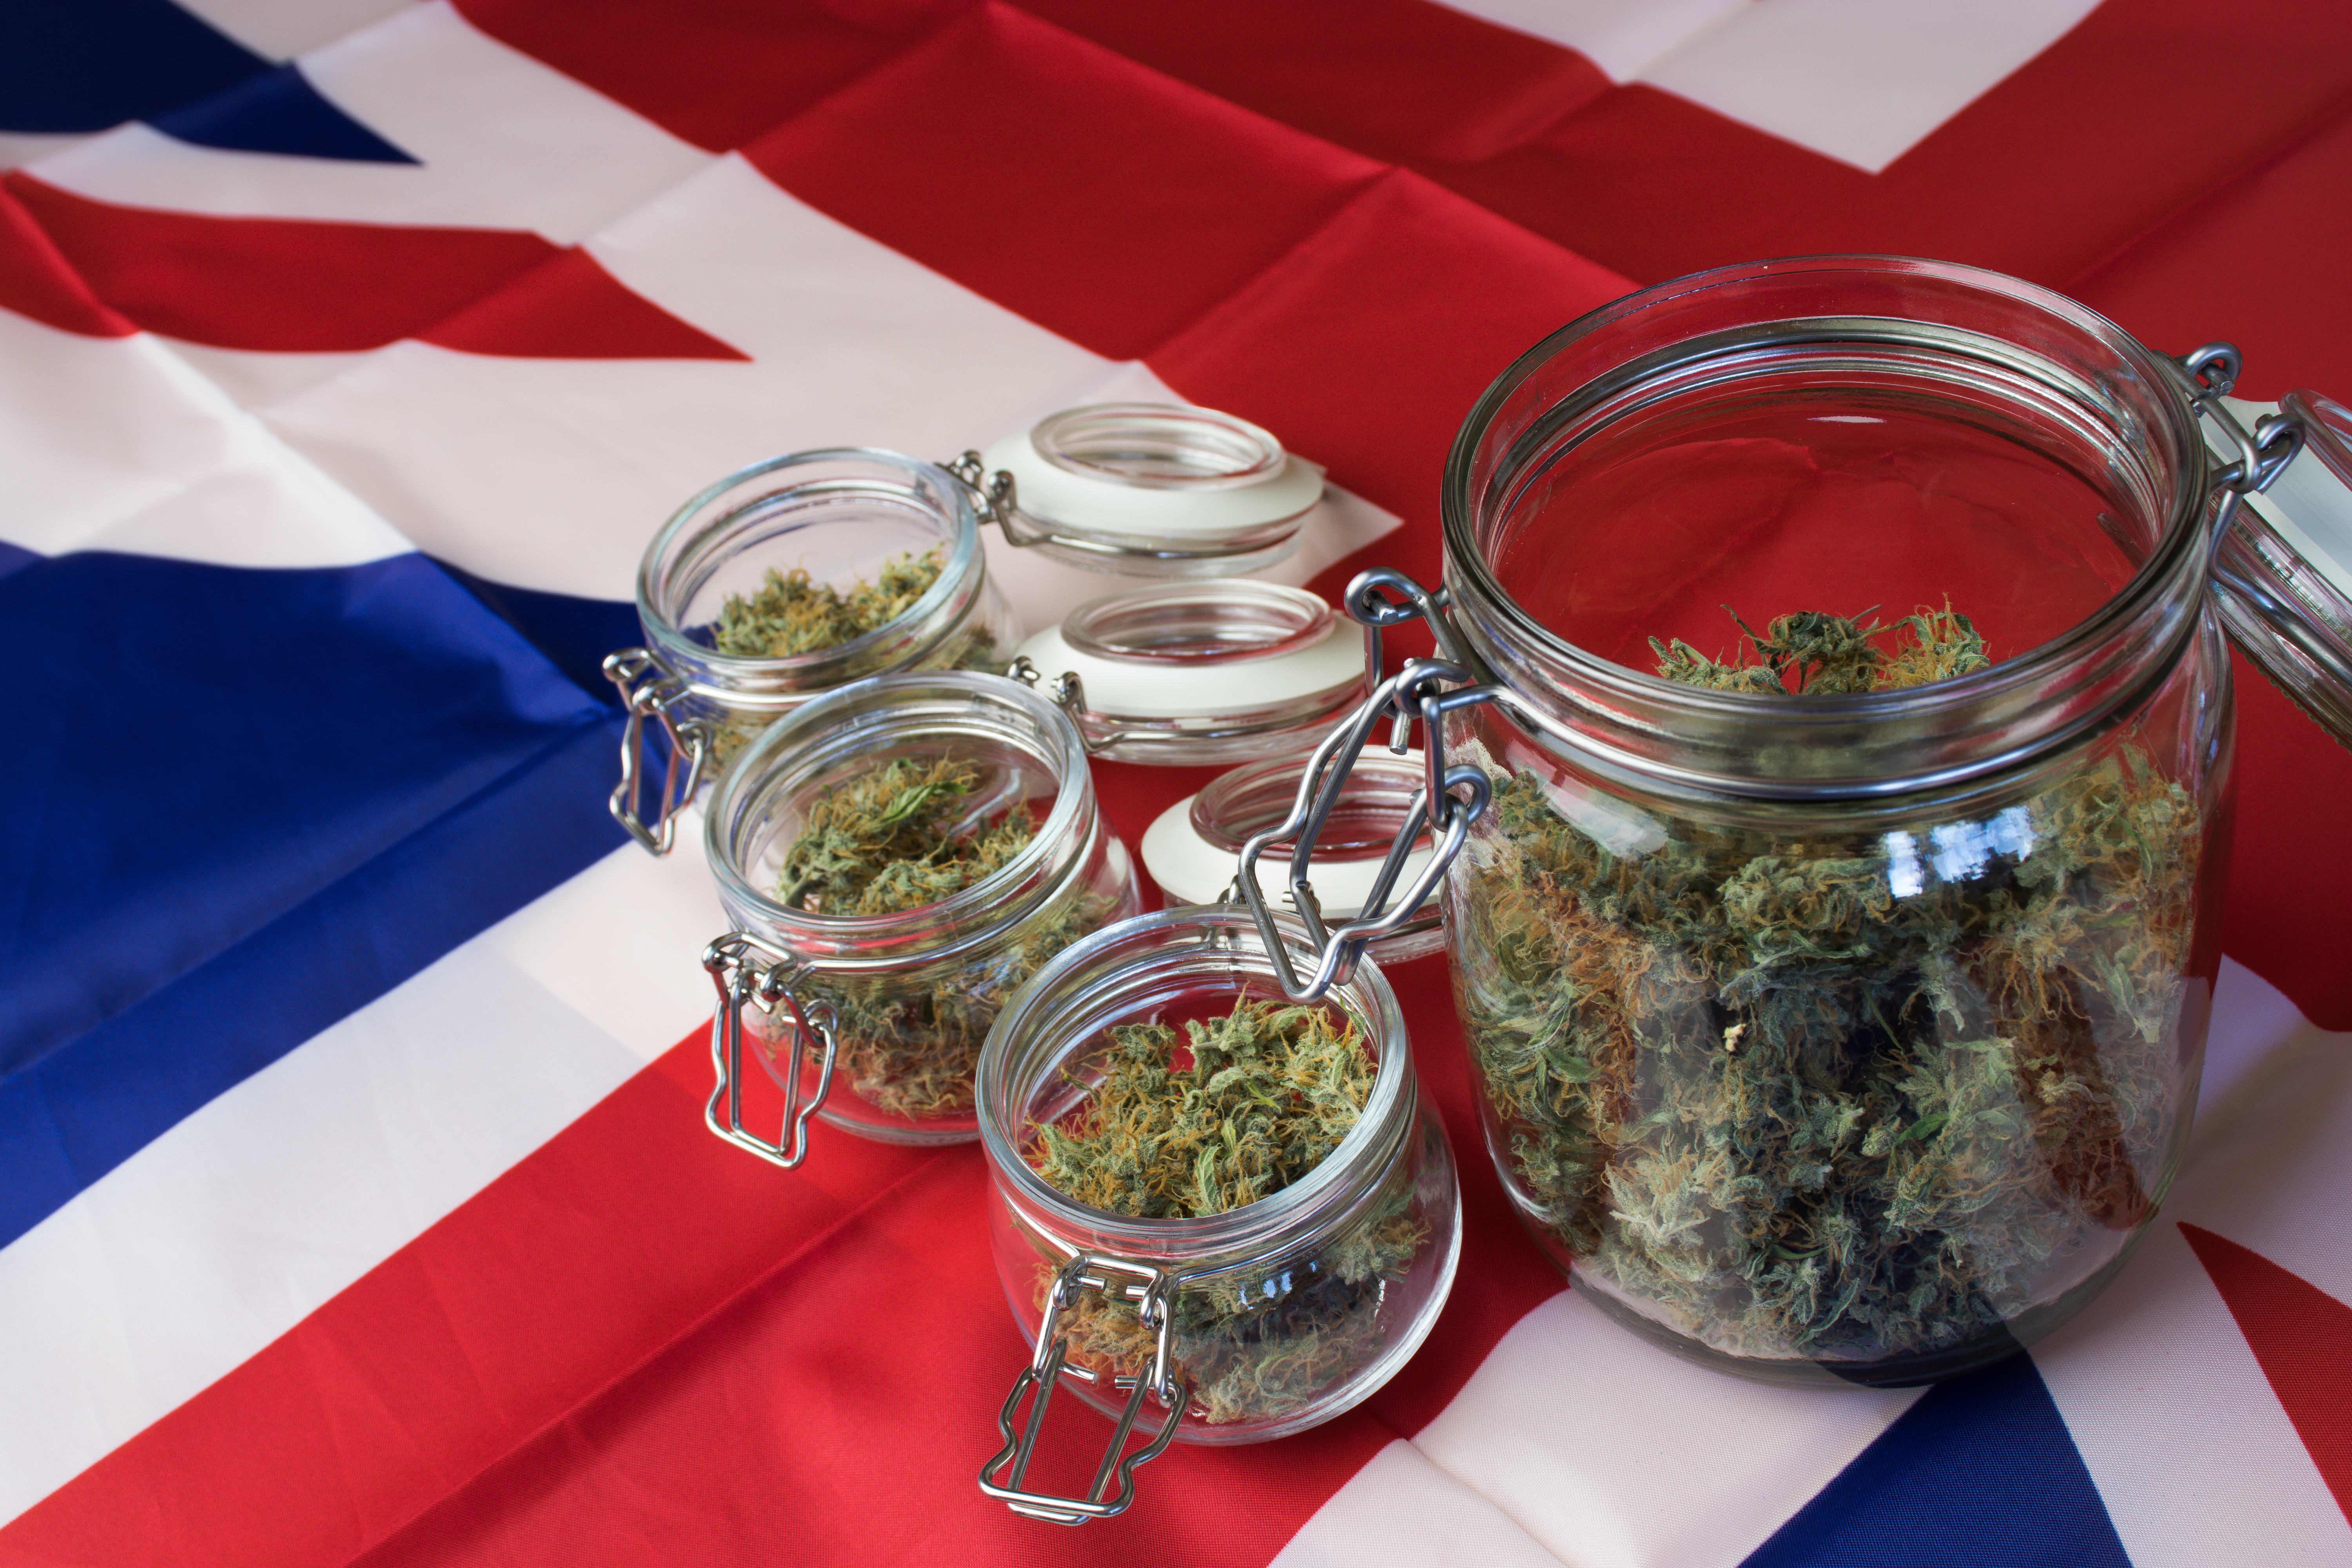 London Mayor Floats the Possibility of a Legal Adult-Use UK Cannabis Industry